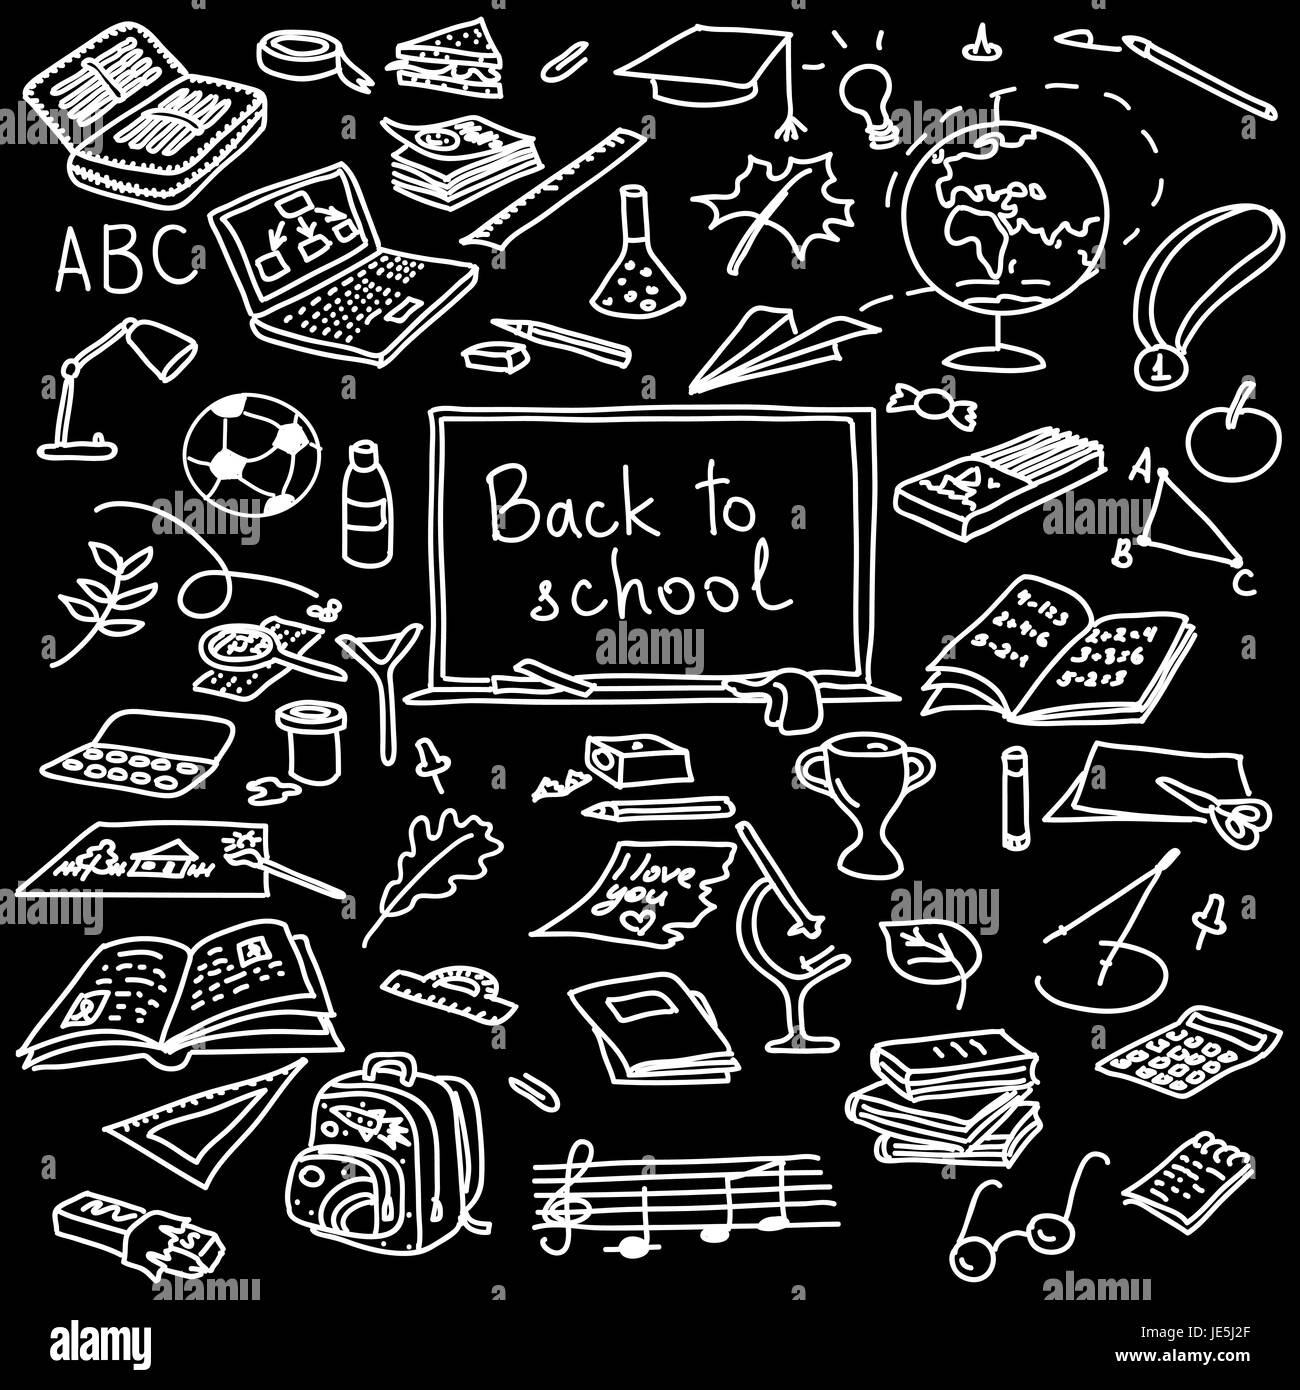 Education or back to school Concept. glasses, pencils, note books, chalk,  eraser over chalkboard background. Stock Photo